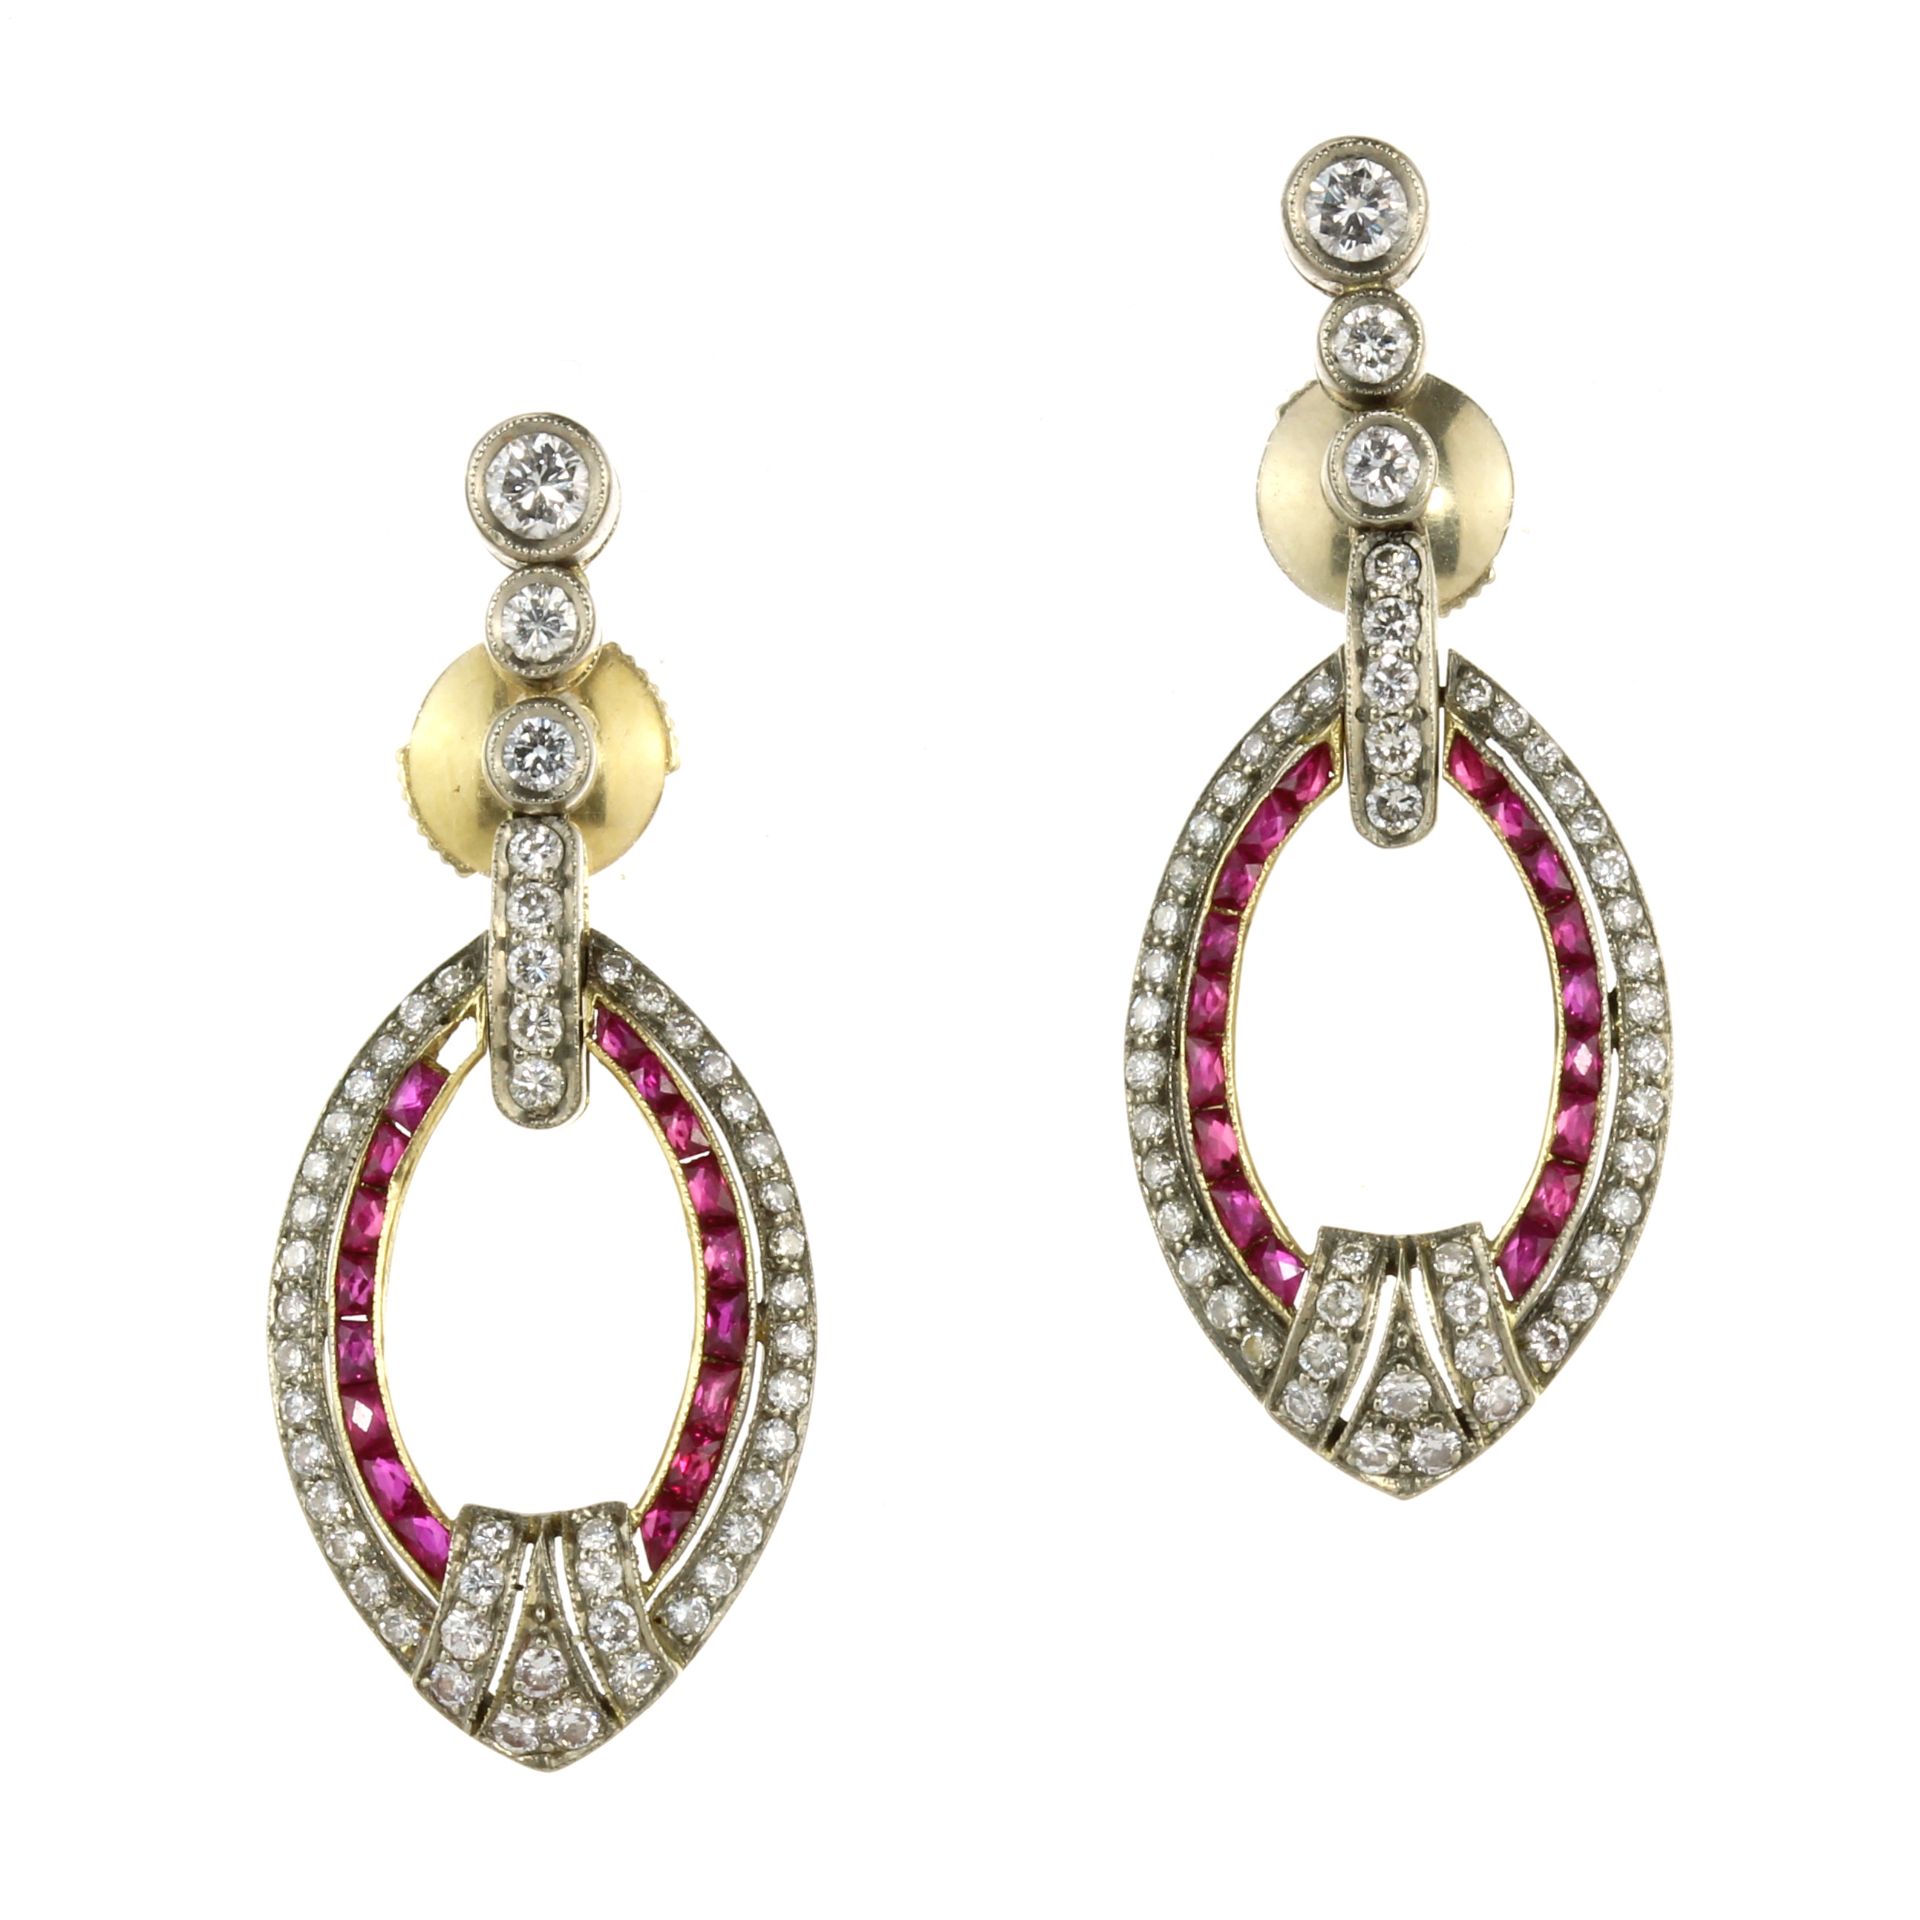 A PAIR OF ANTIQUE ART DECO RUBY AND DIAMOND EARRINGS in 18ct yellow gold and platinum each